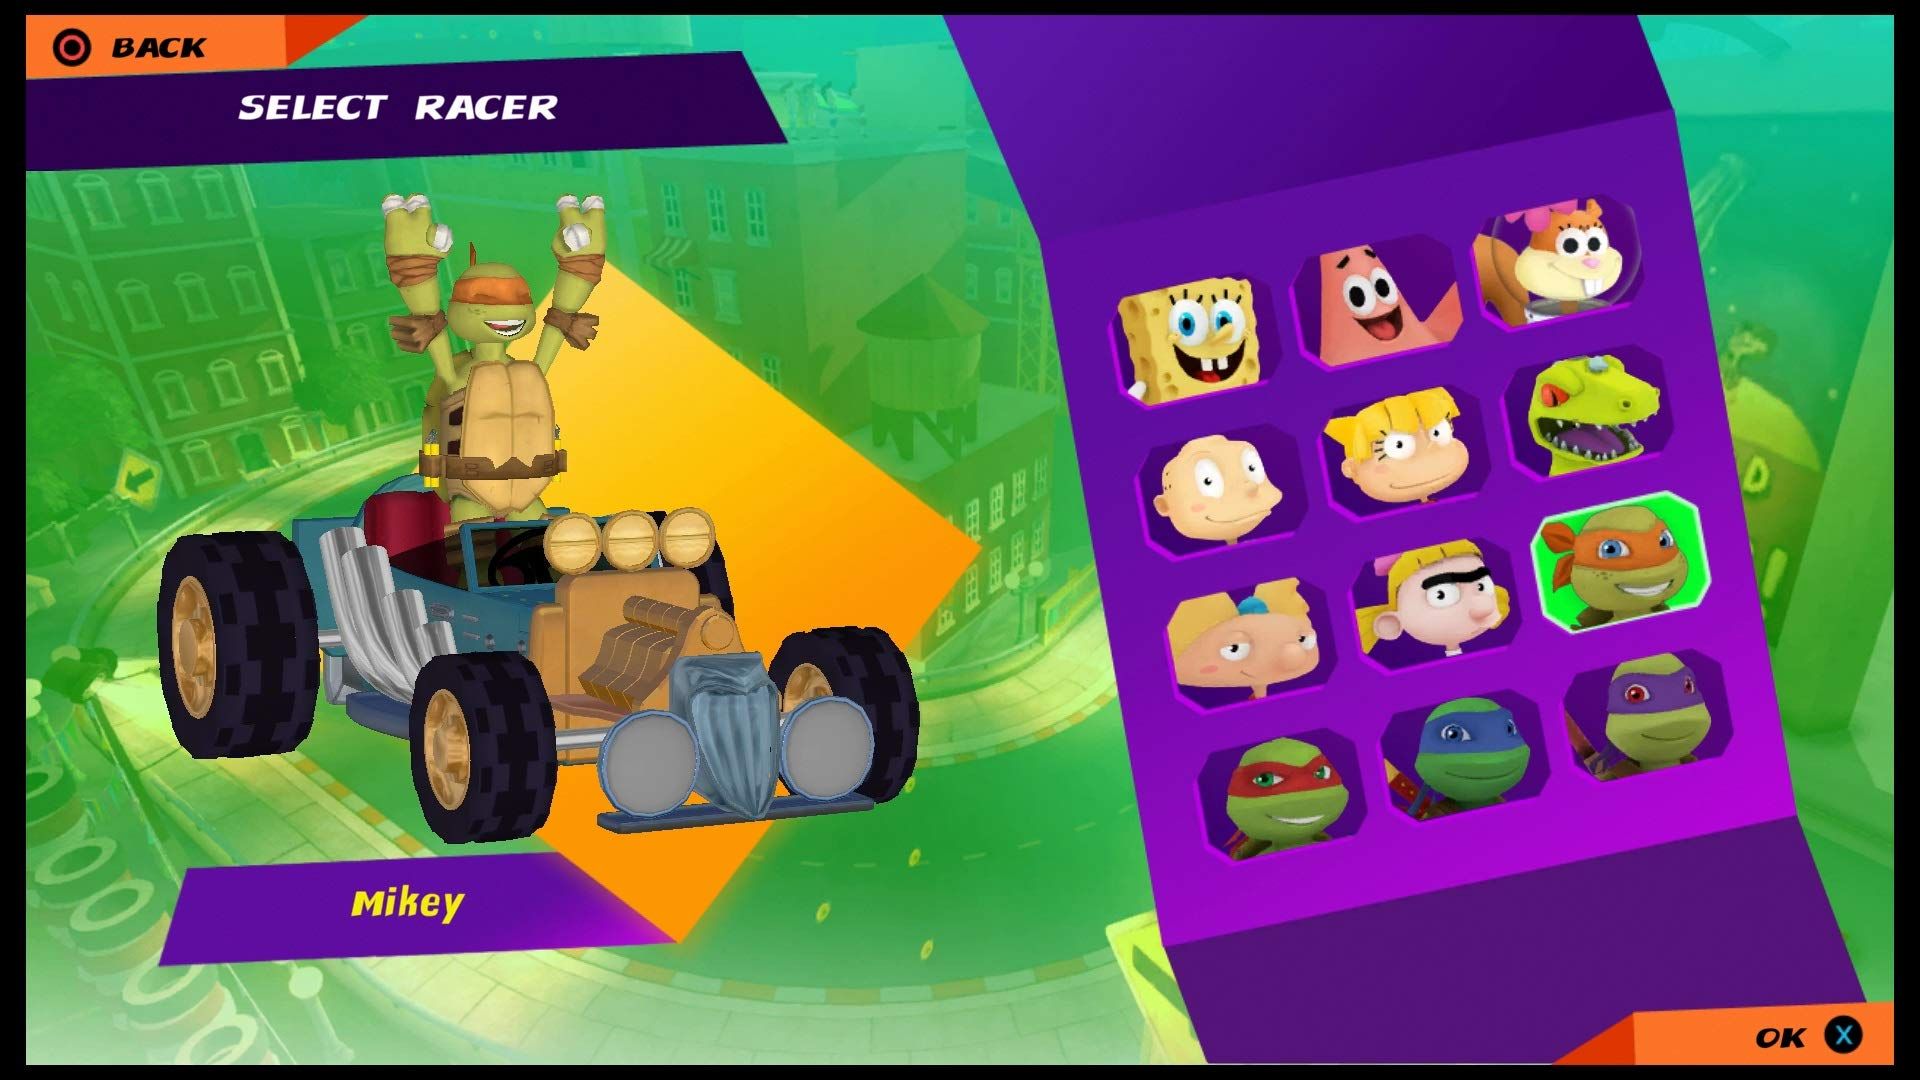 Nickelodeon Kart Racers Review Derivative and Lacking Meaningful Content